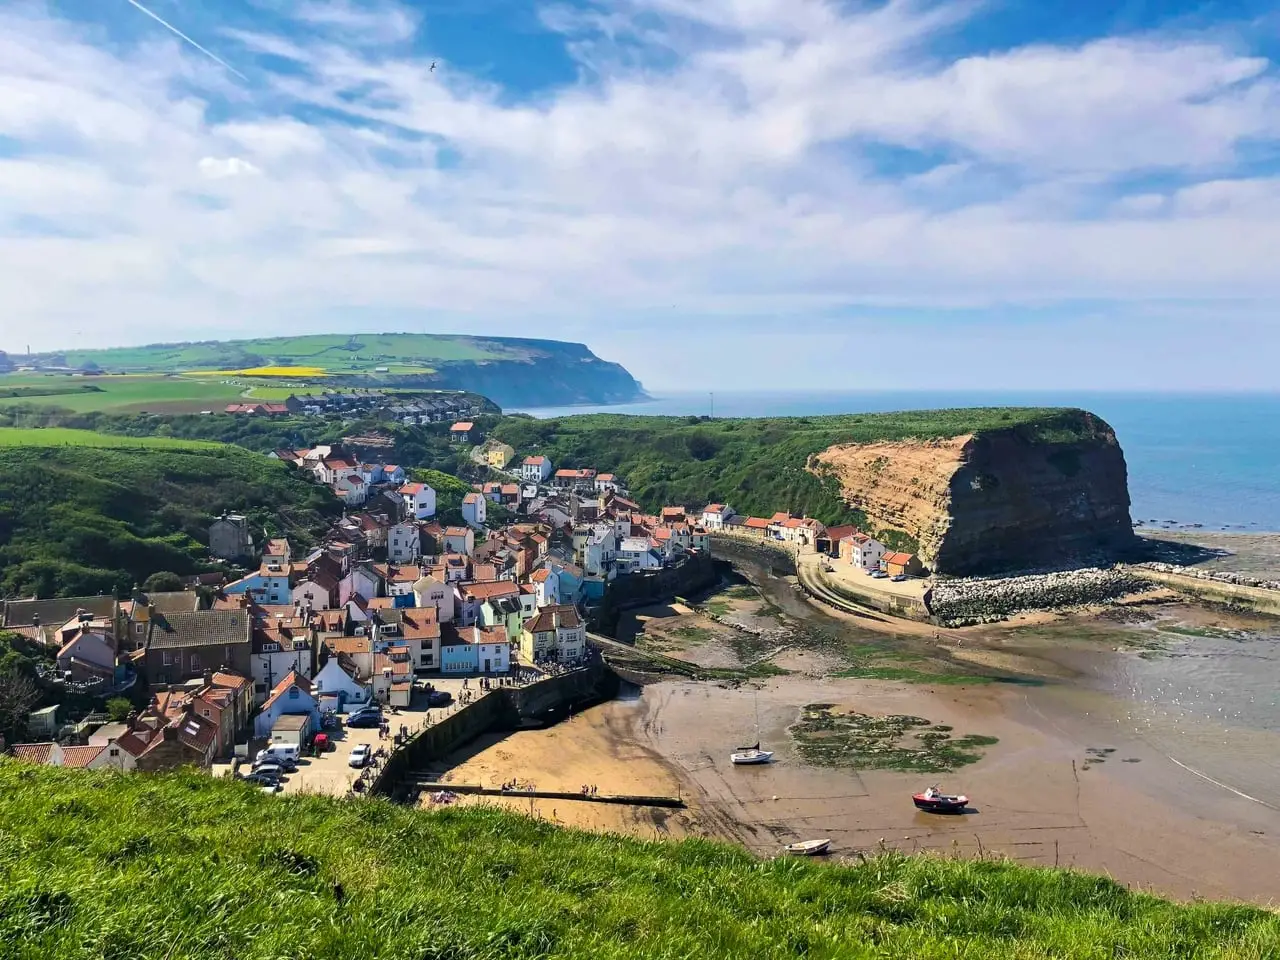 View of the village of Staithes from above